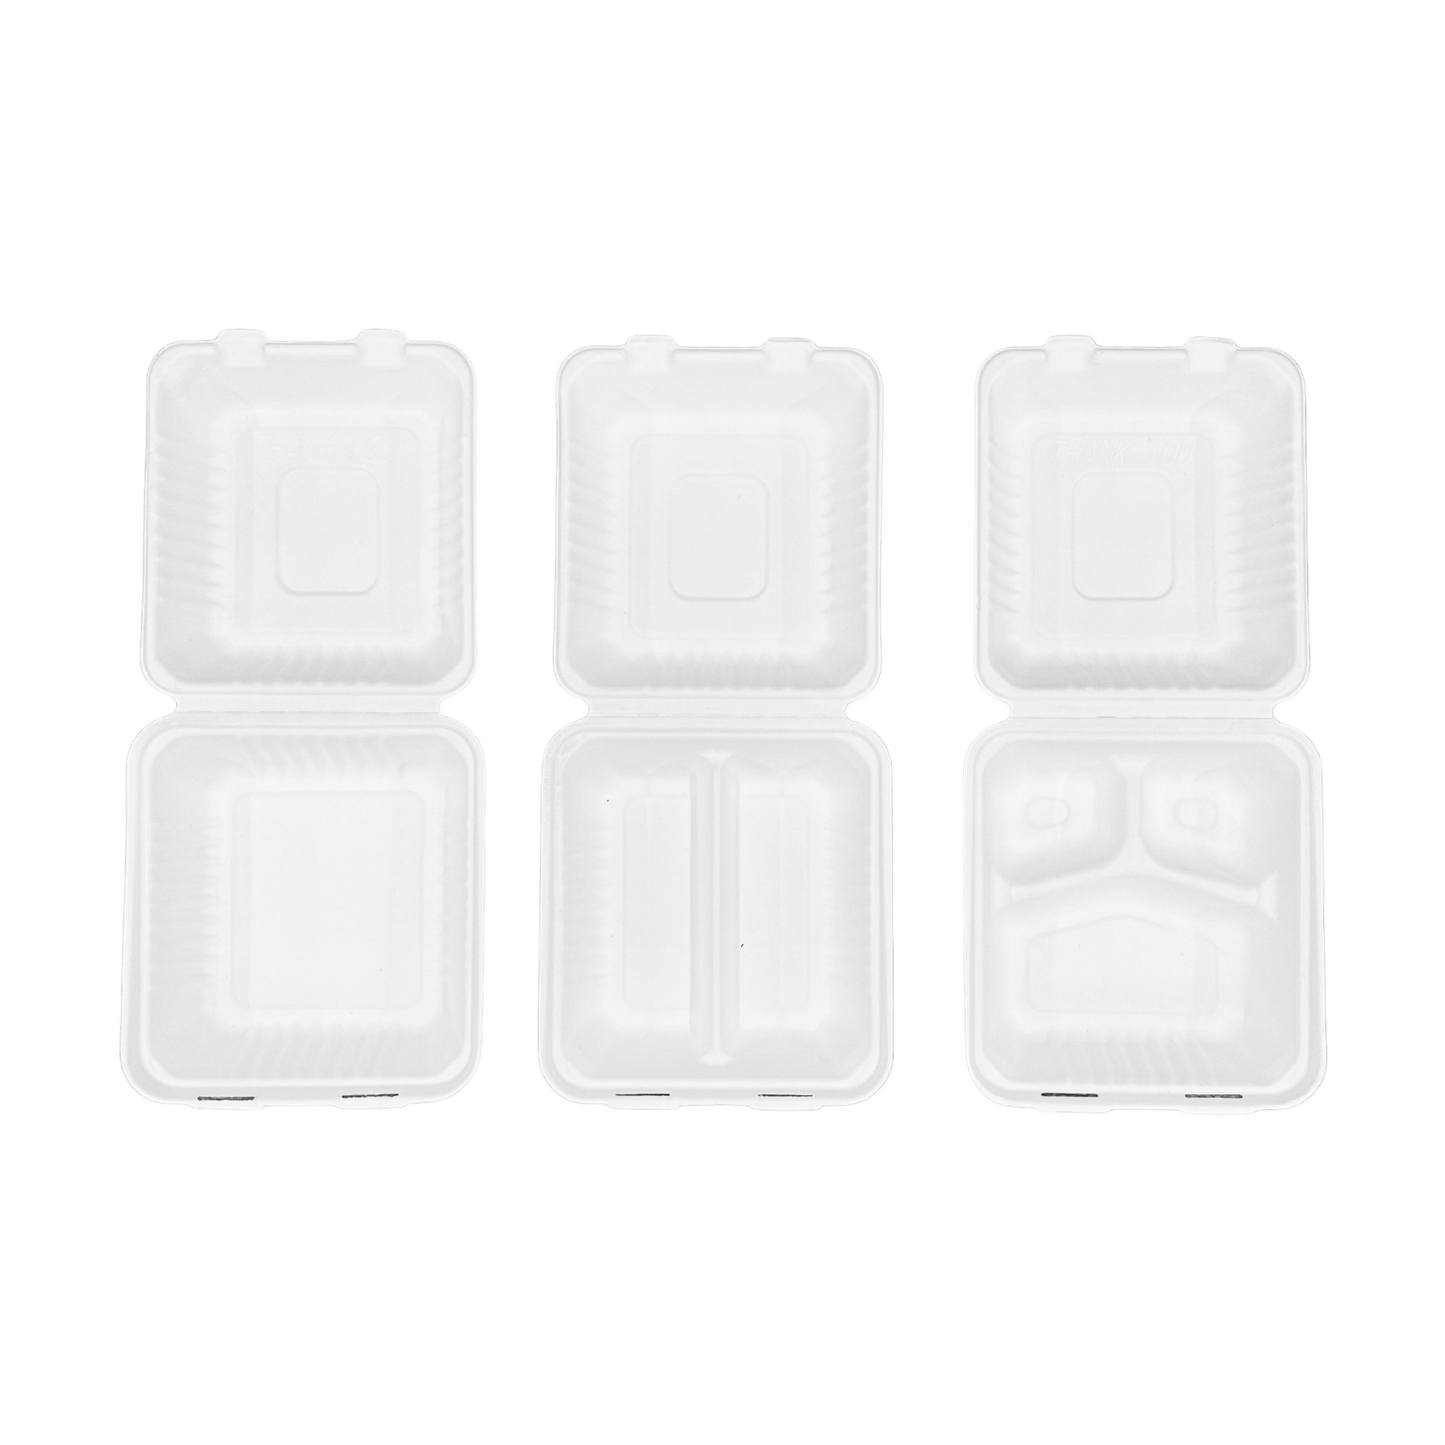 200 Pcs, 8x8x3'', 2-Compartment, Sugarcane Clamshell Food Container